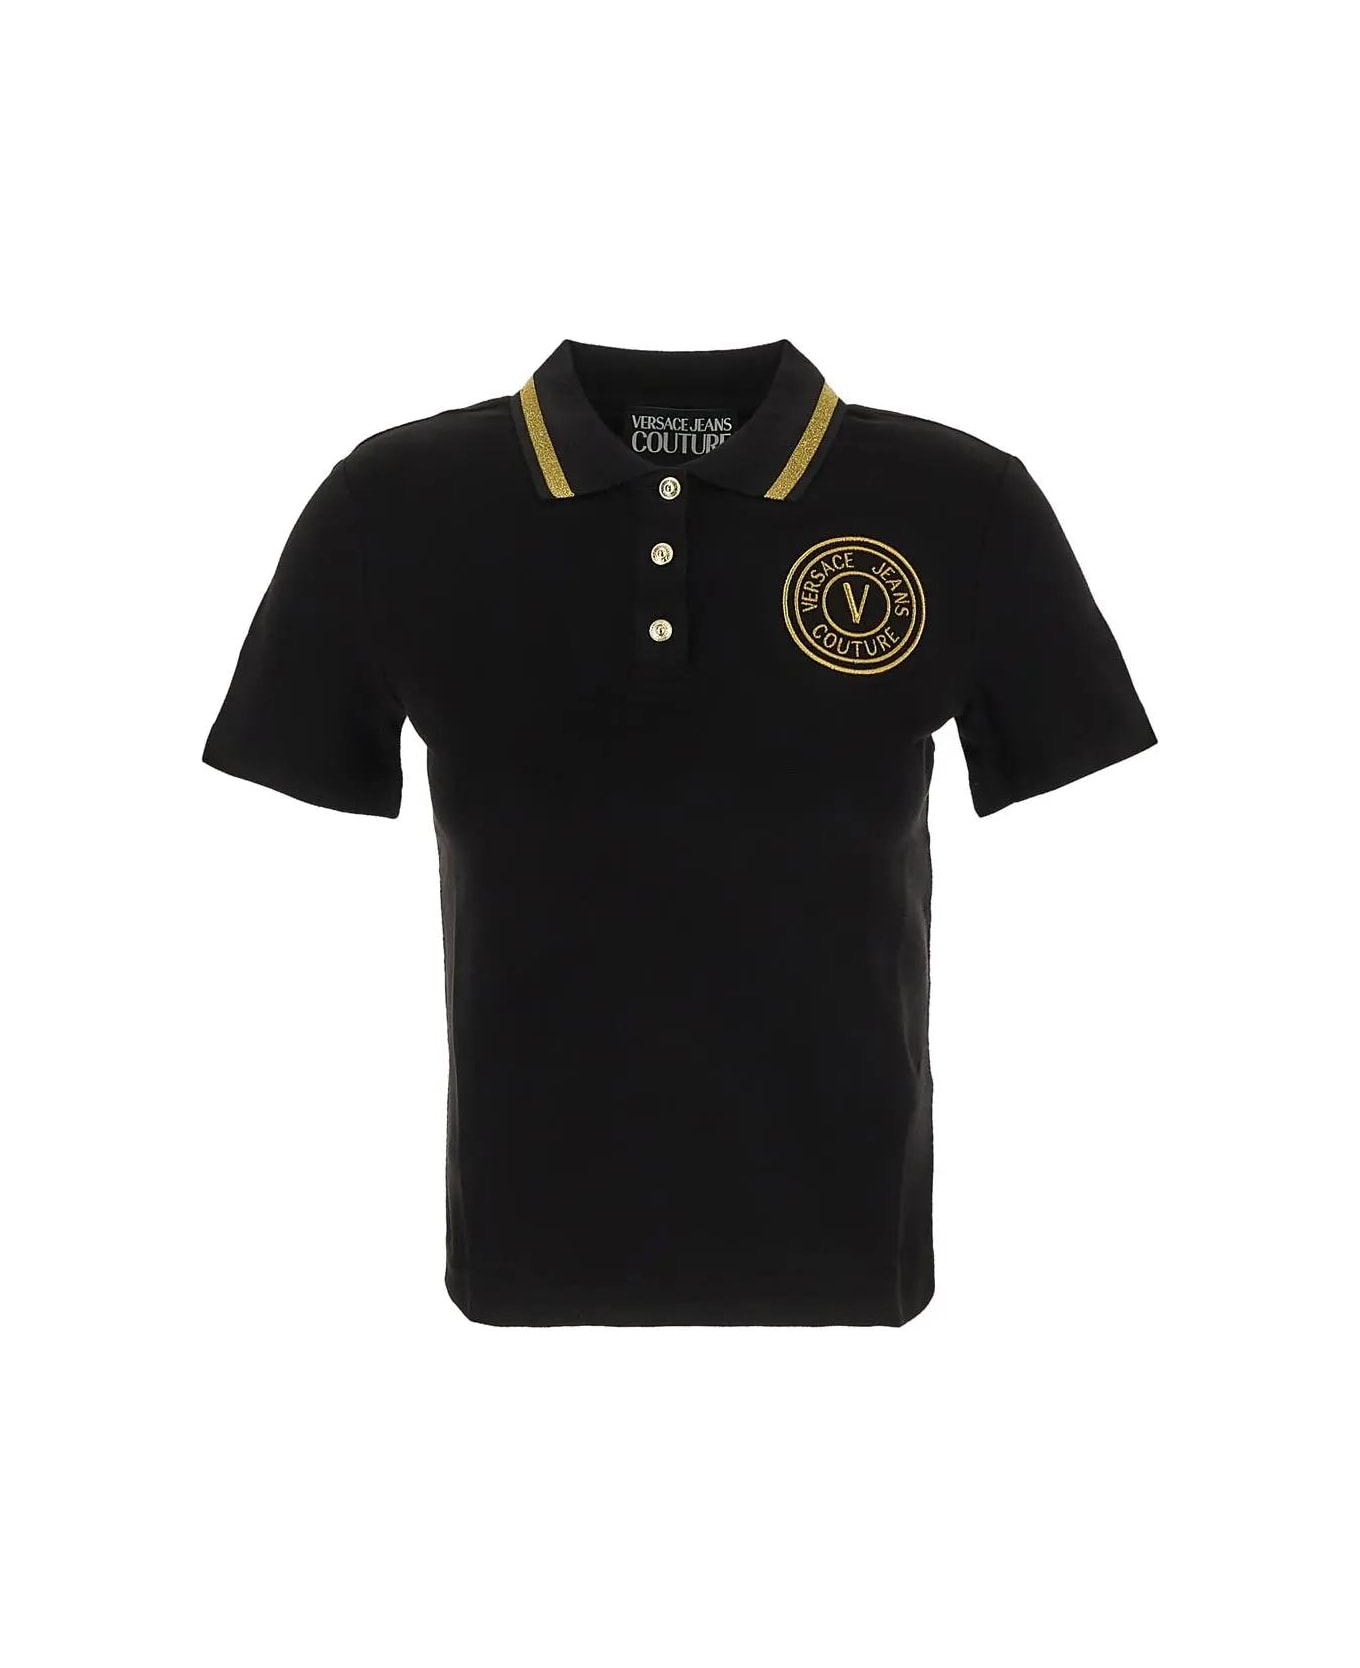 Versace Jeans Couture Logoed Polo - Black